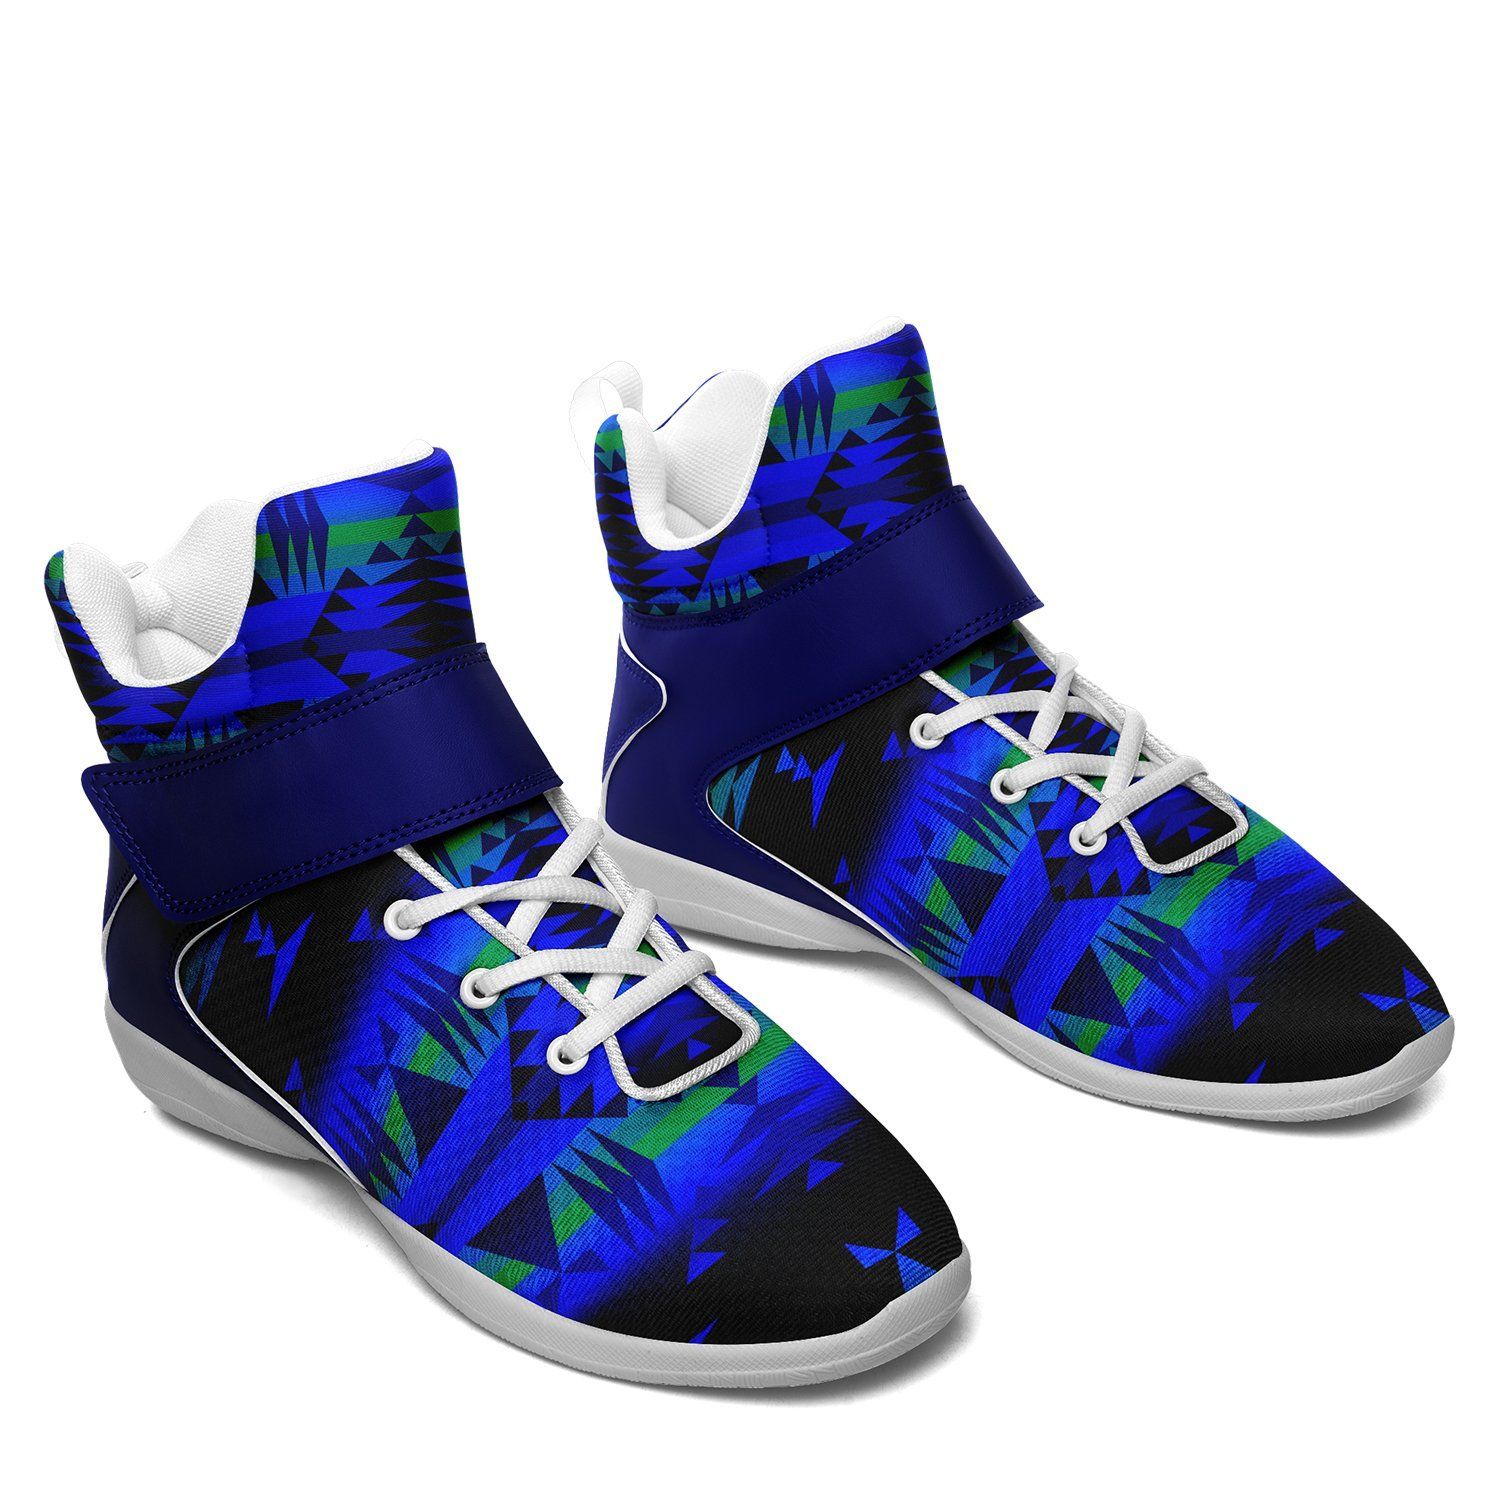 Between the Blue Ridge Mountains Ipottaa Basketball / Sport High Top Shoes - White Sole 49 Dzine 